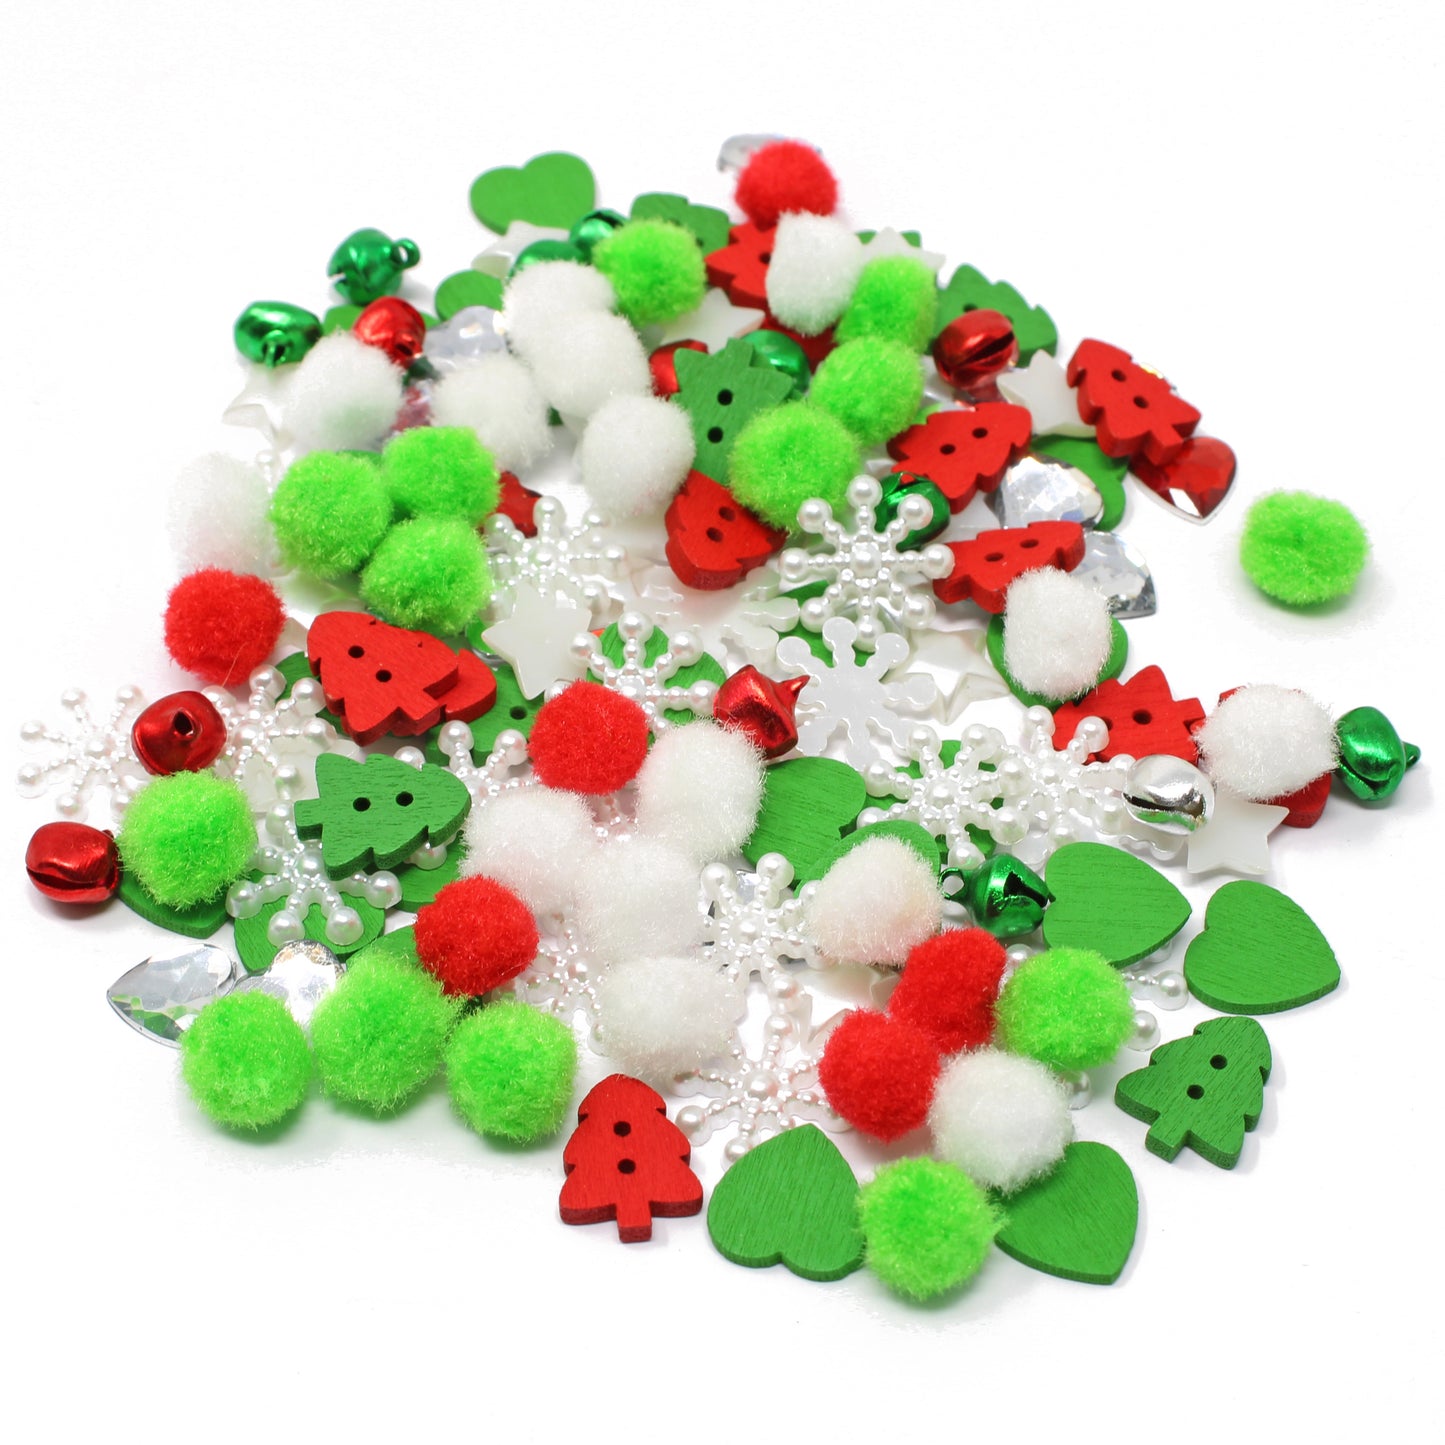 Christmas Pom Poms 150 Mix Wood Acrylic & Resin Buttons